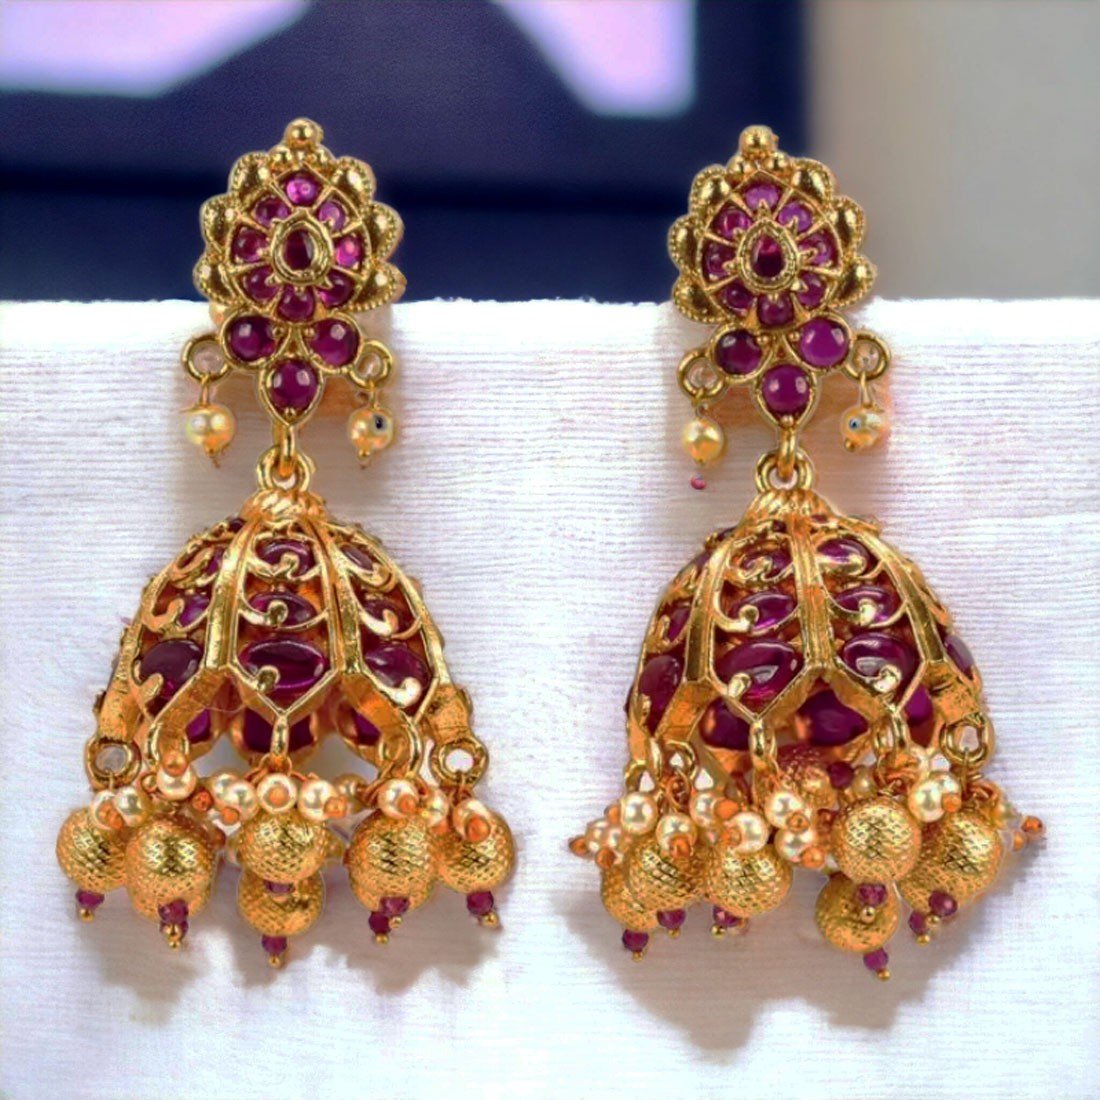 22k Gold Jhumka Earrings in Studded with Pearls, handcrafted using Tra